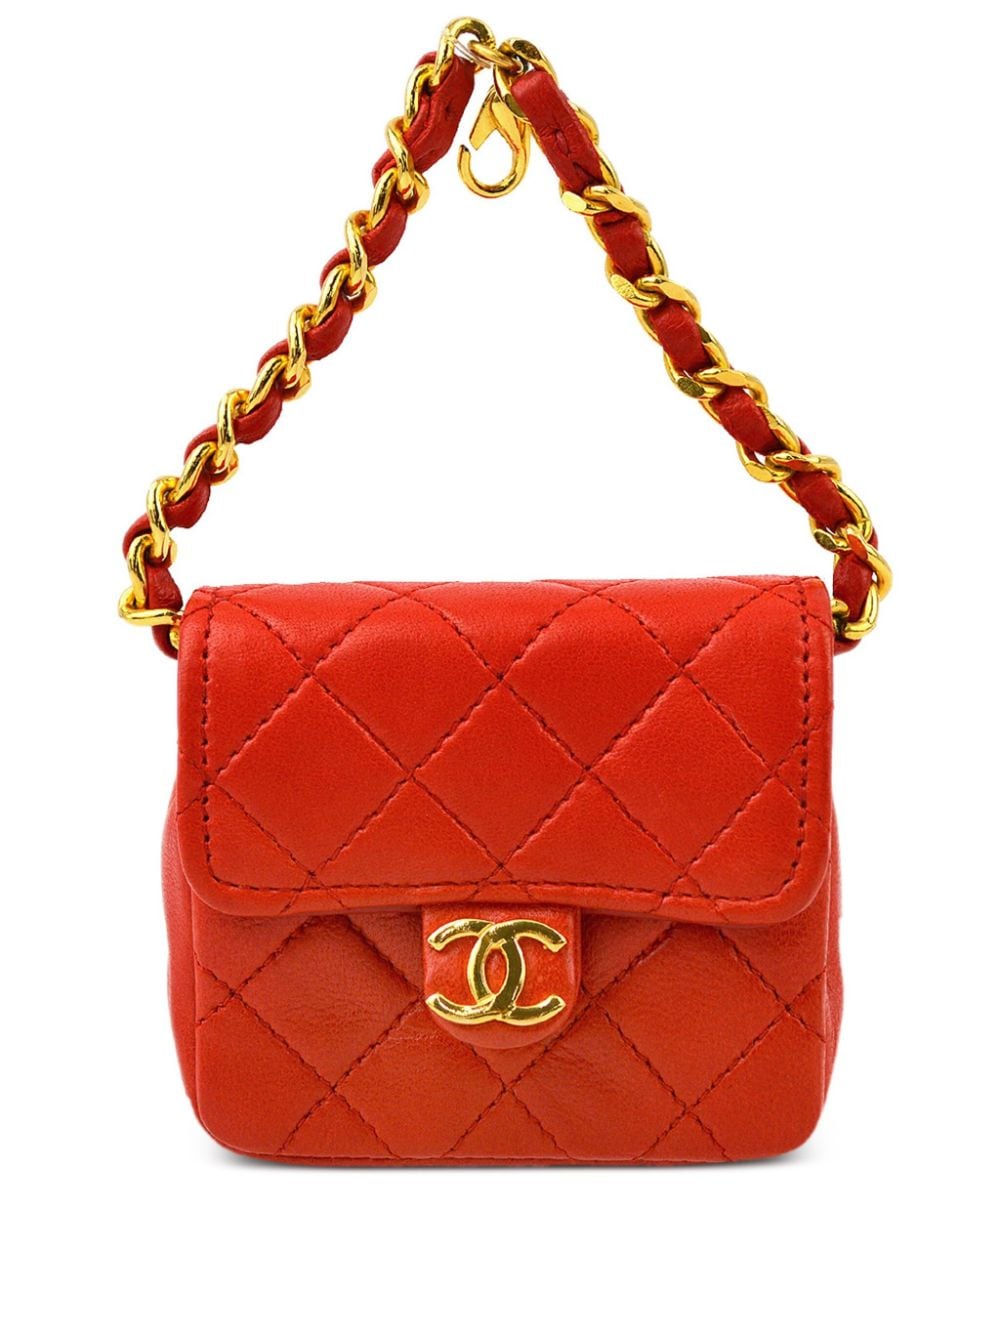 CHANEL Pre-Owned 1990-2000s mini Clutch mit Rautensteppung - Rot von CHANEL Pre-Owned